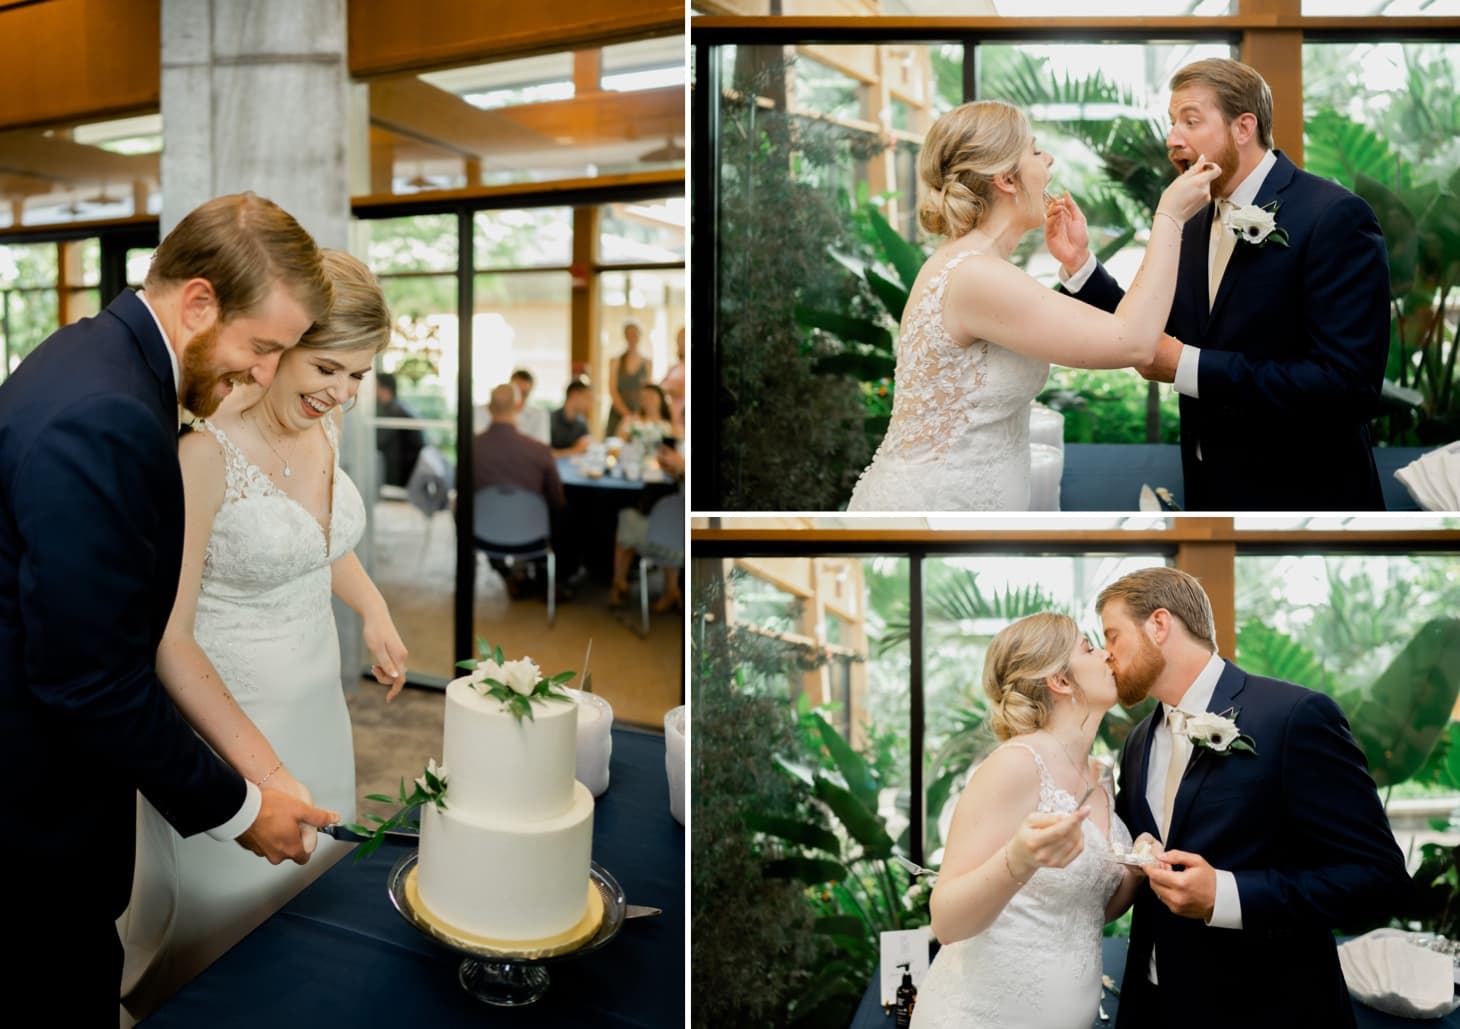 51 bride and groom cake cutting at reiman gardens reception